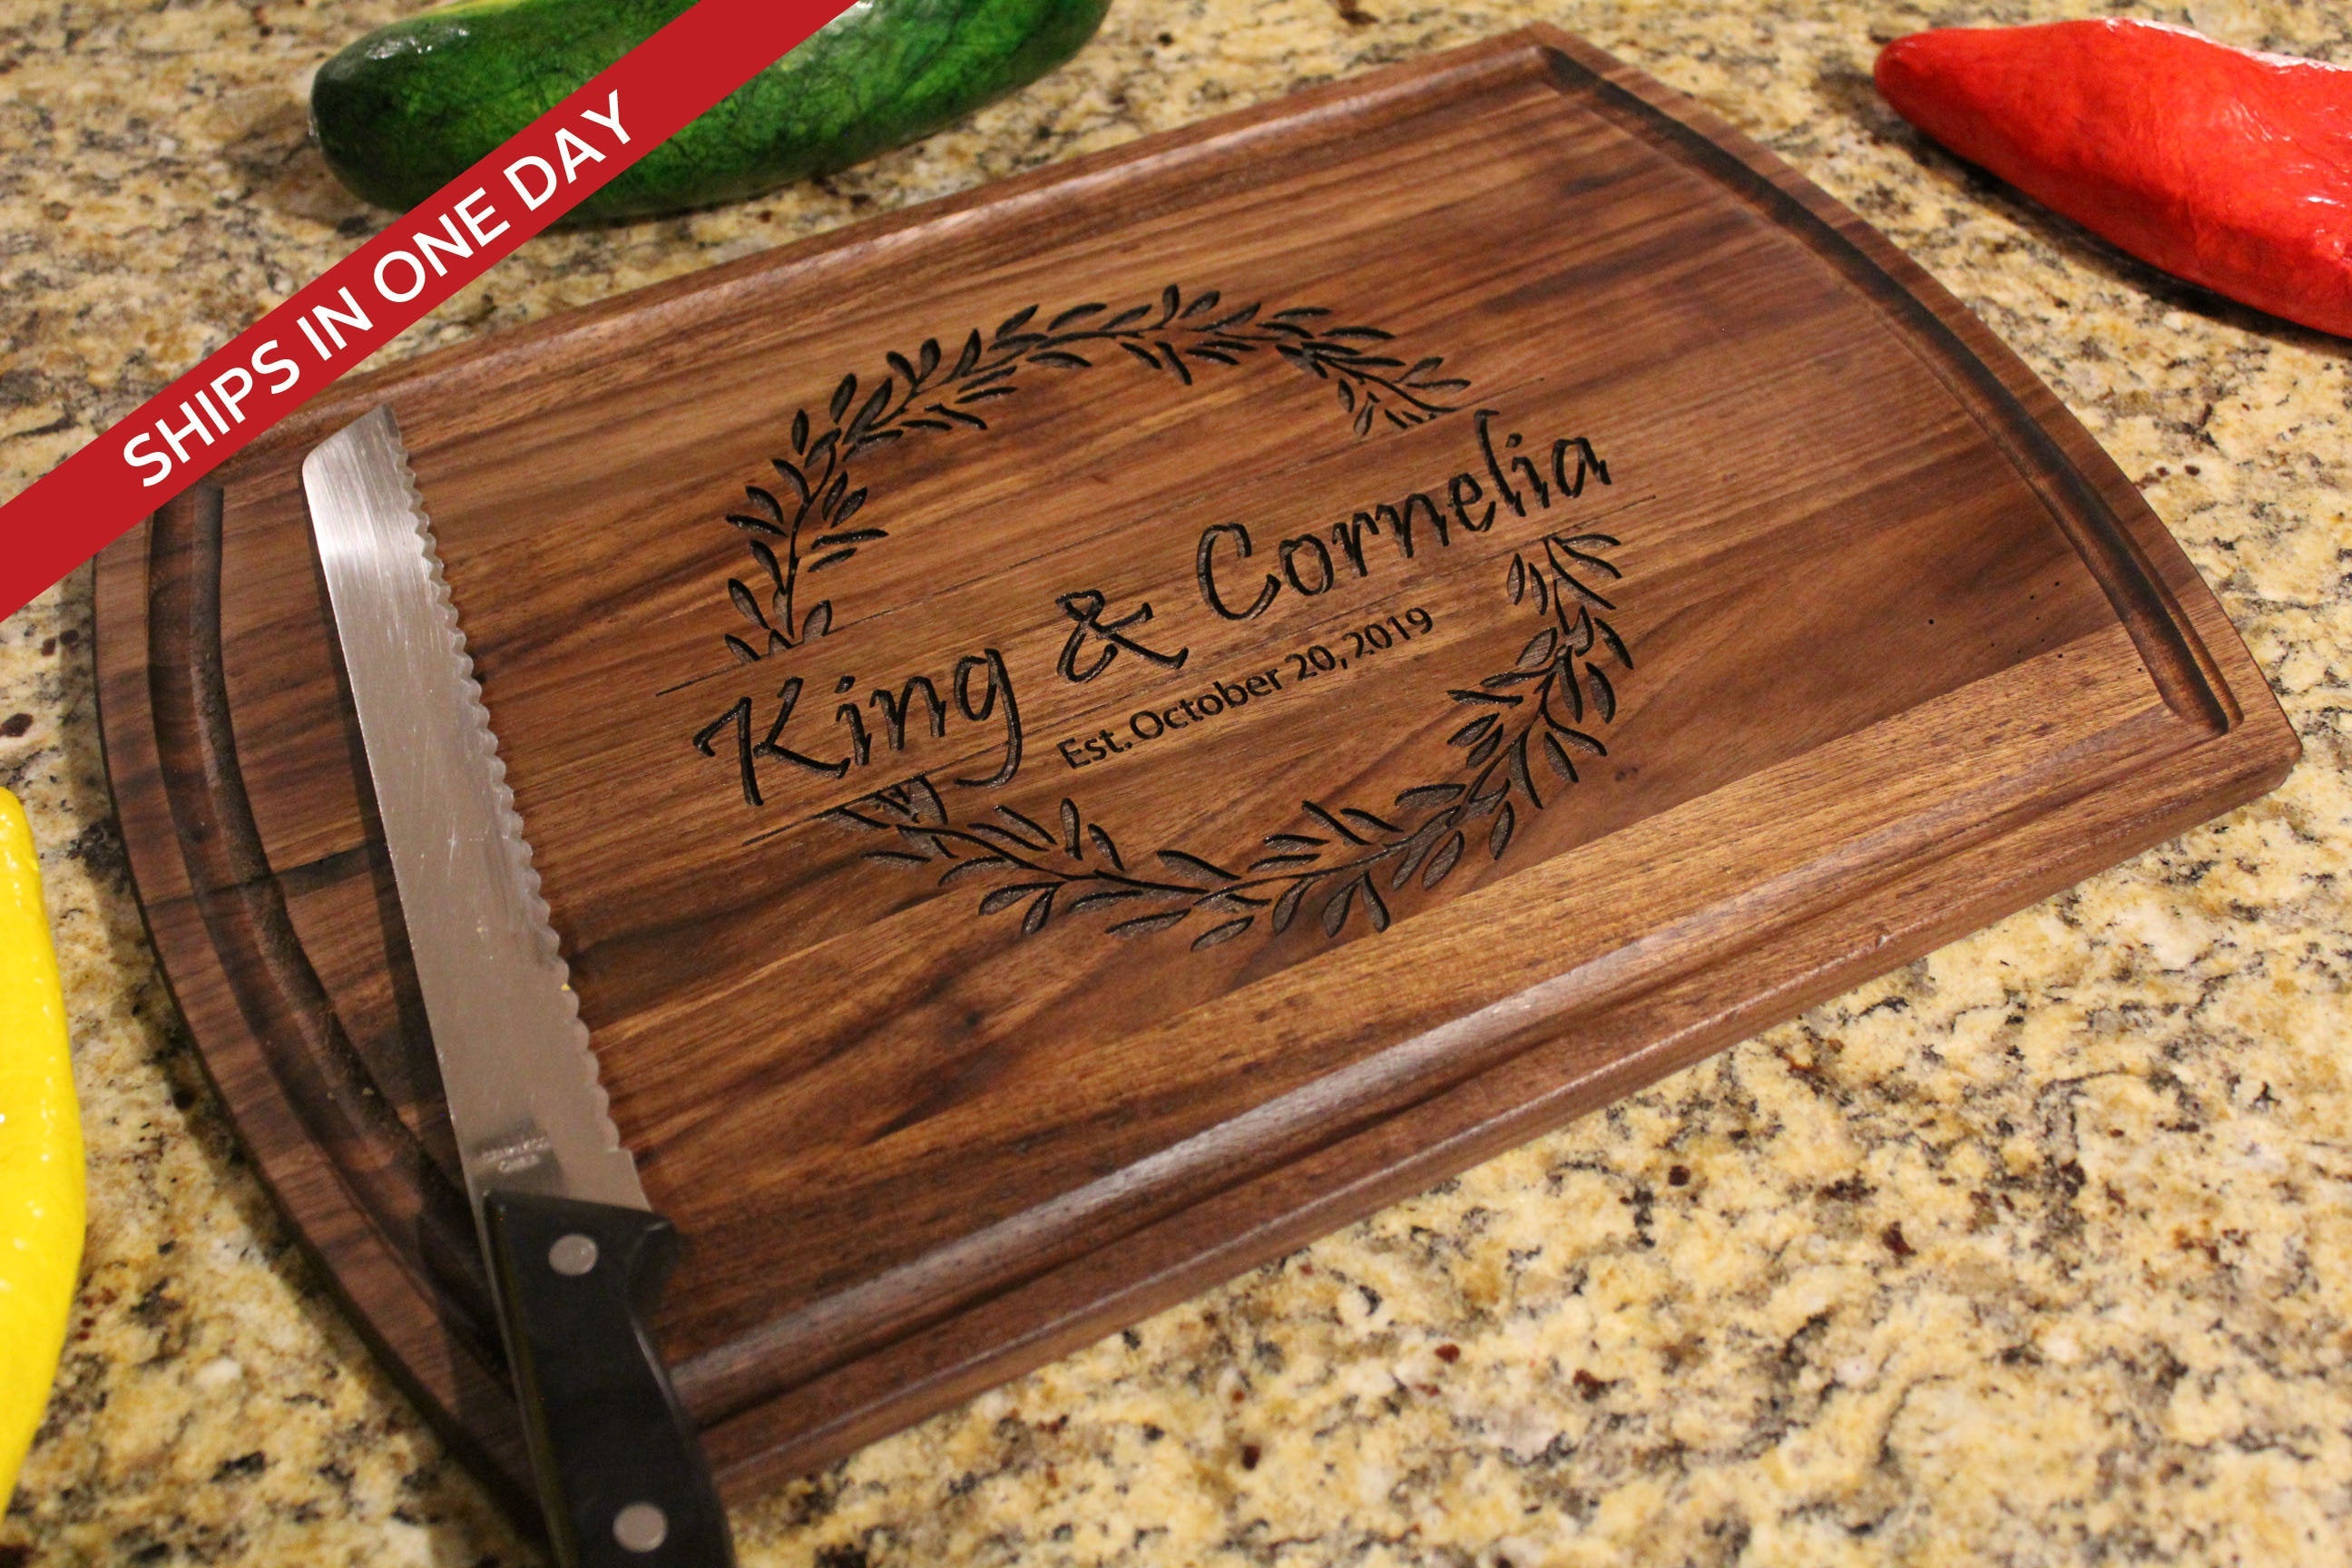 Wedding Anniversary Gifts for Women, for Couple or Bride - Walnut  Personalized cutting boards, Engraved wooden cutting board, Custom cutting  board